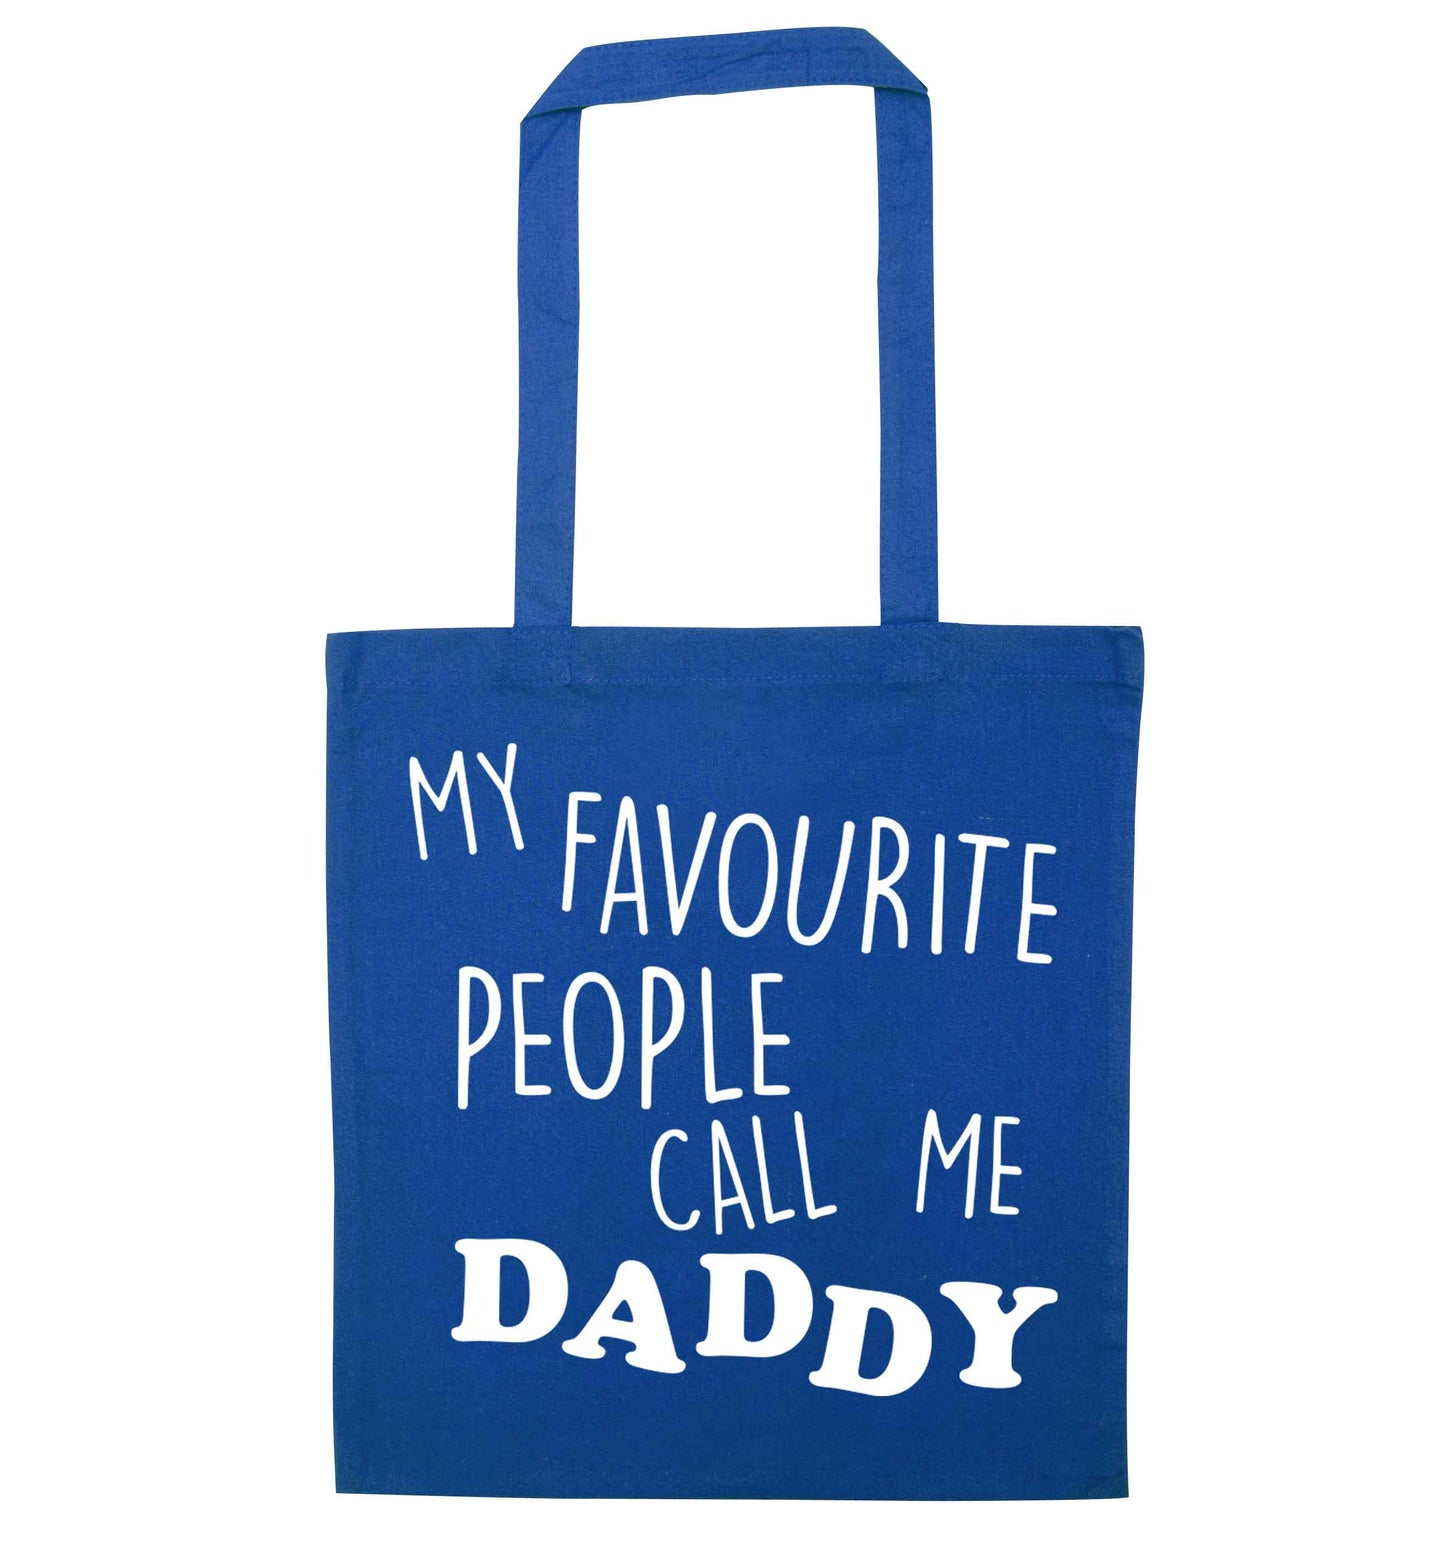 My favourite people call me daddy blue tote bag